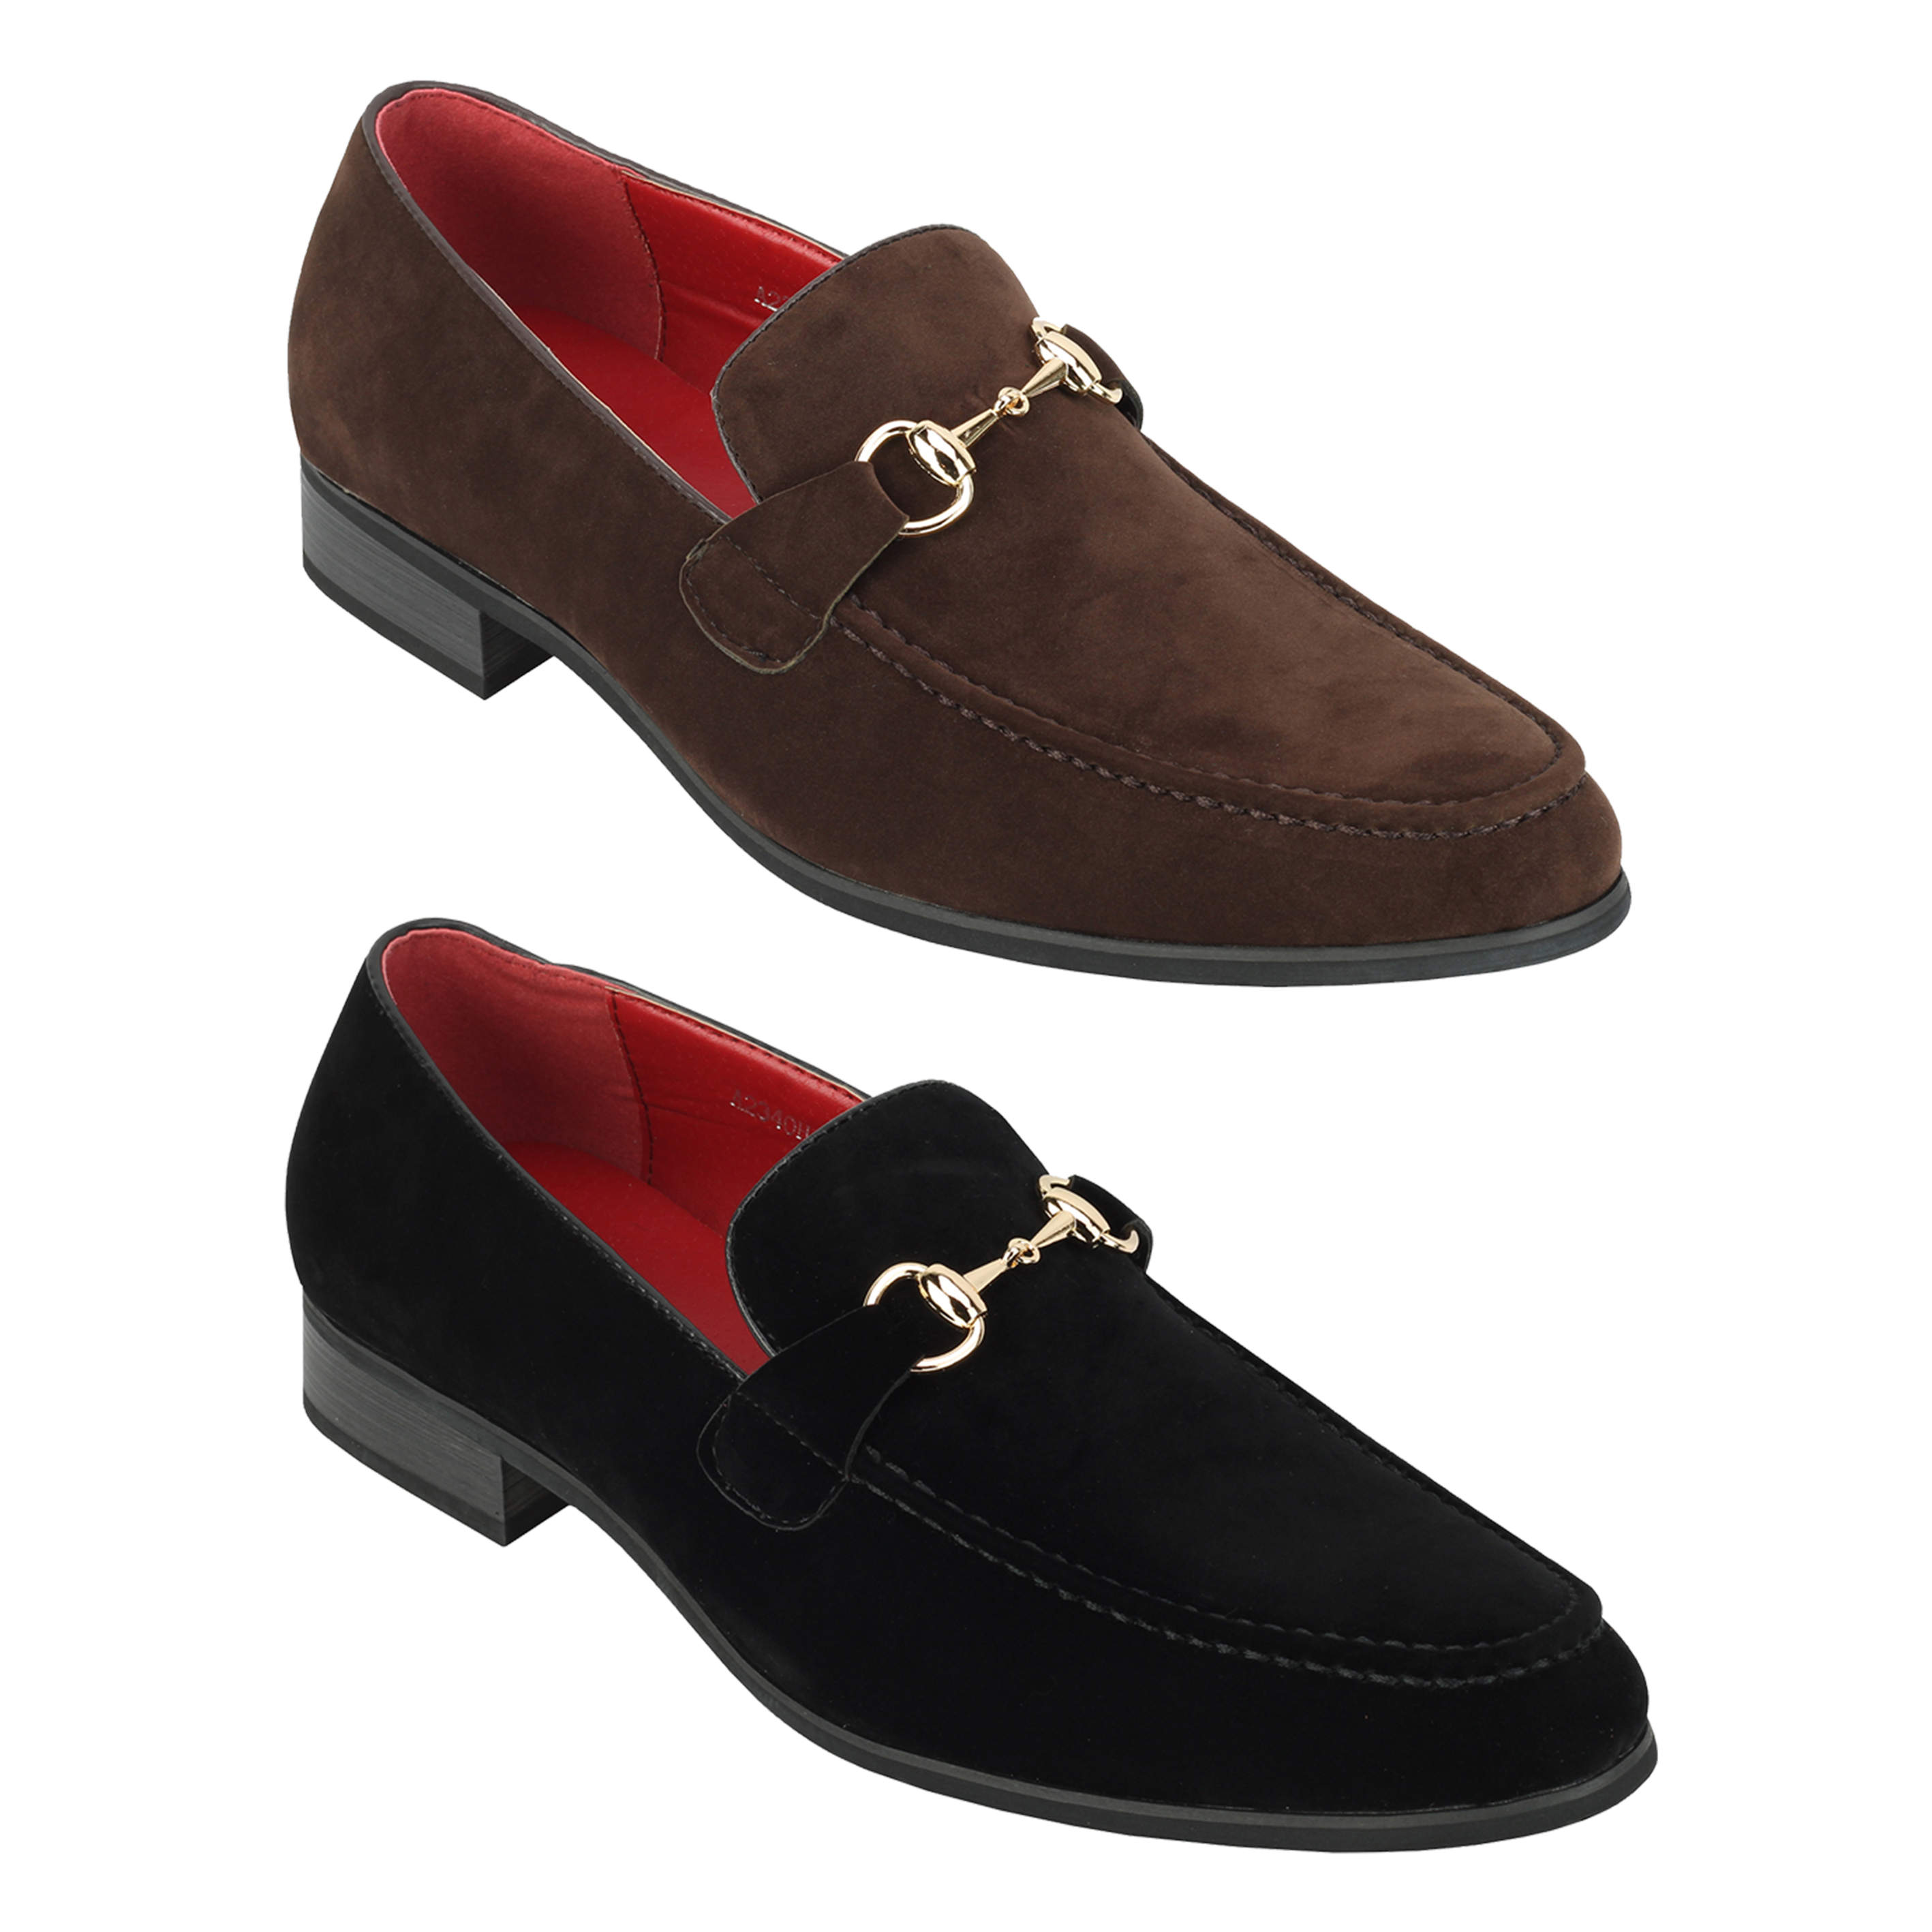 Mens Horsebit Loafers Suede Leather Lined Slip on Classic Driving Shoes ...